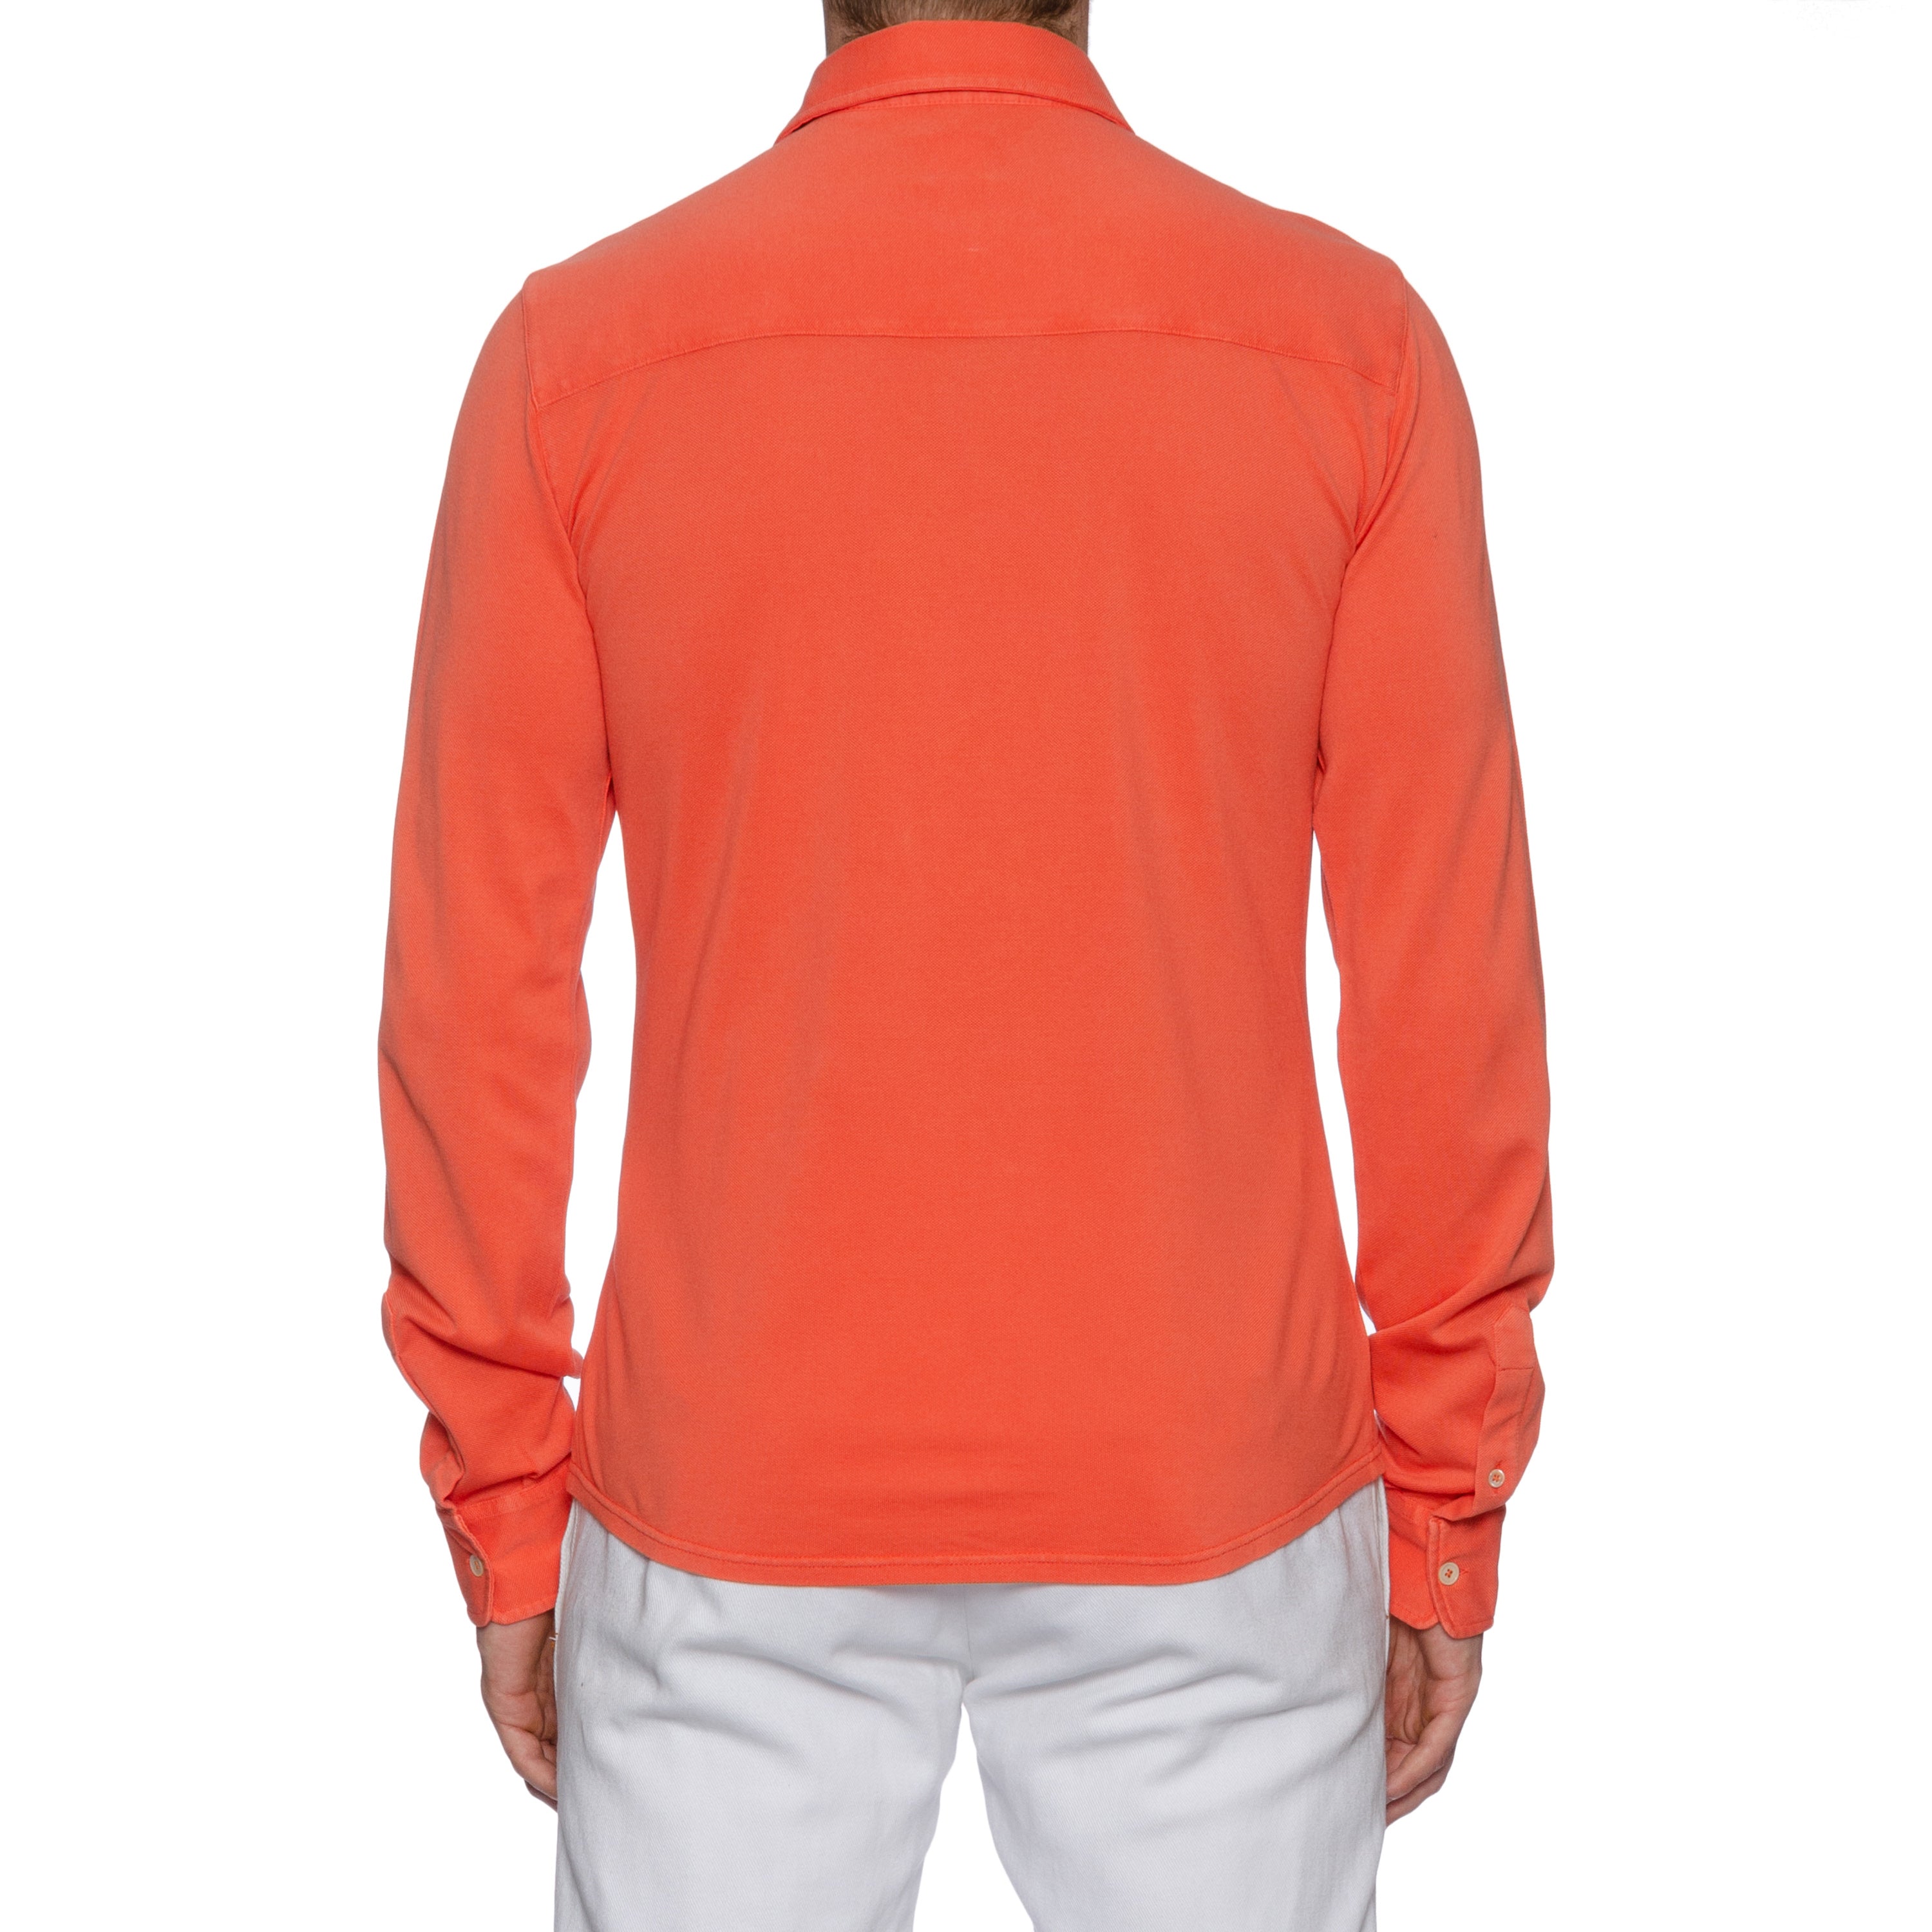 FEDELI "Steve" Coral Cotton Pique Frosted Long Sleeve Polo Shirt NEW FEDELI